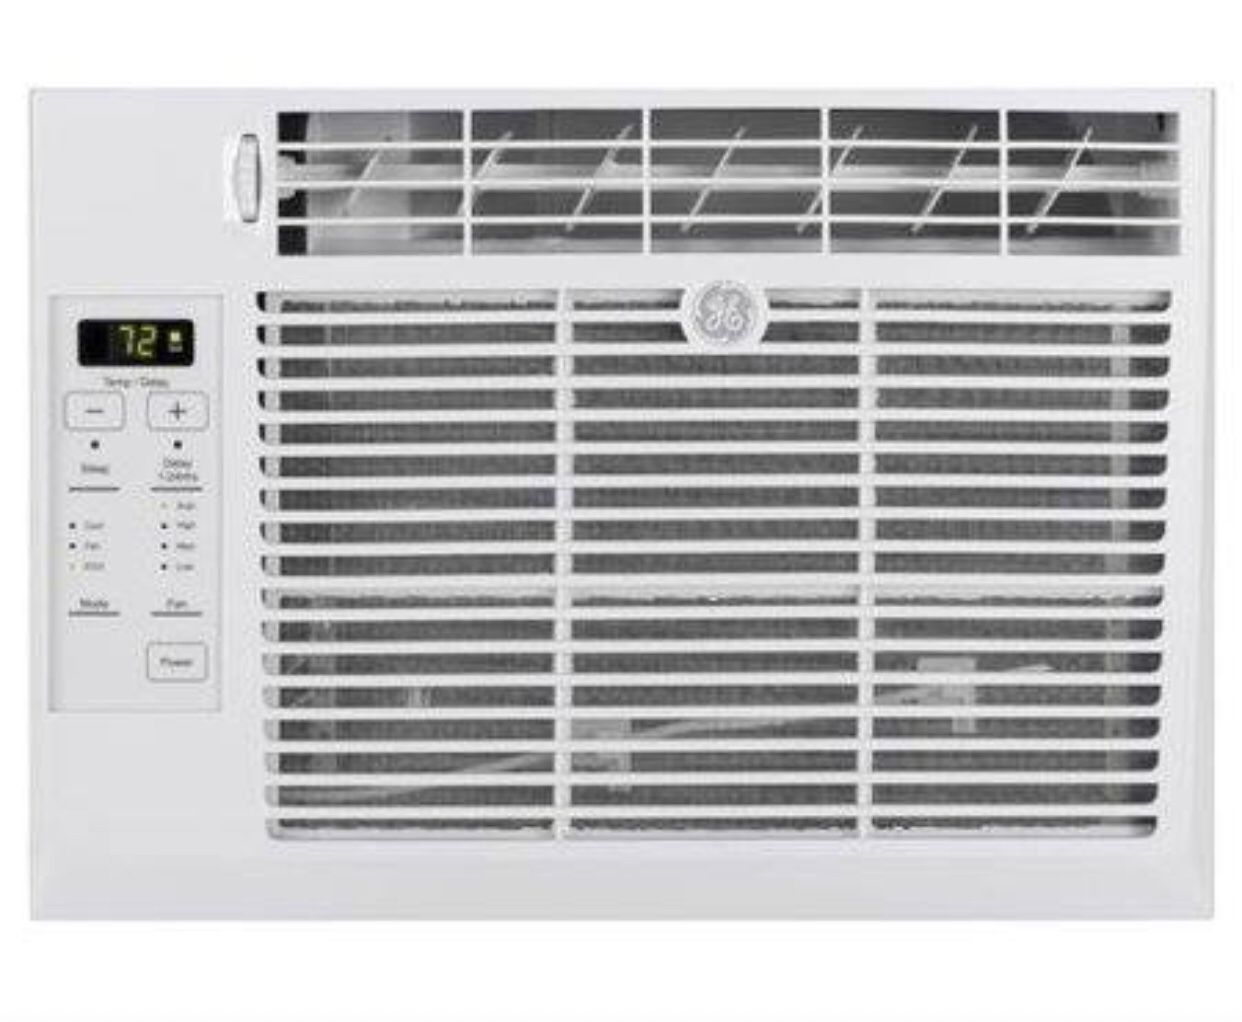 GE 5,000 BTU Window AC With Remote, AEW05LY - New In Box